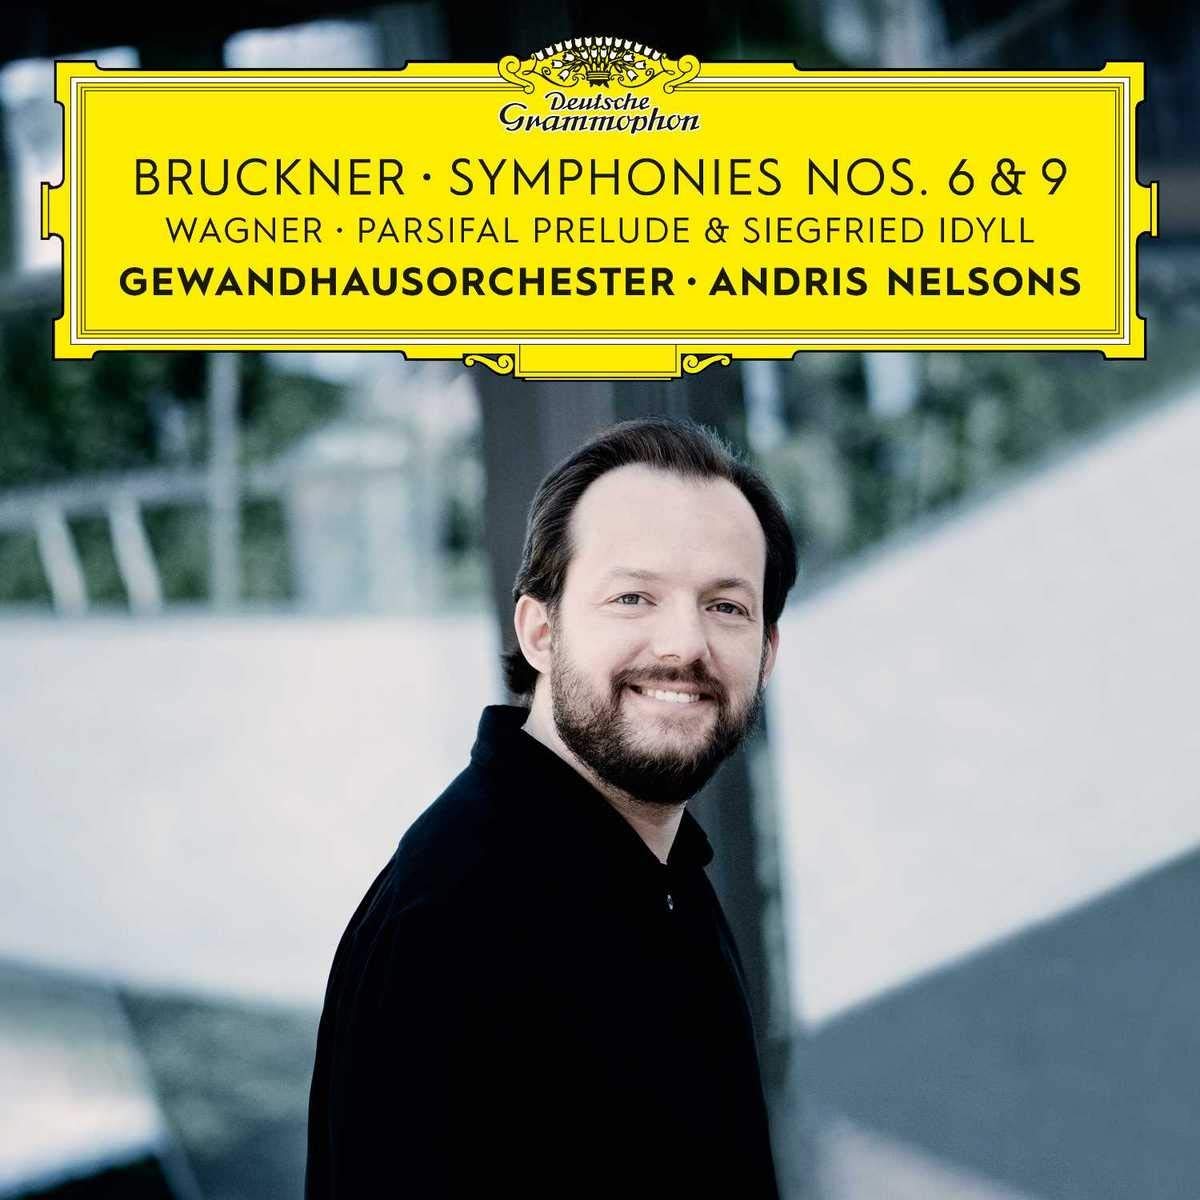 Bruckner: Symphonies Nos. 6 & 9 / Wagner: Parsifal Prelude | Andris Nelsons, Gewandhausorchester Leipzig Andris poza noua